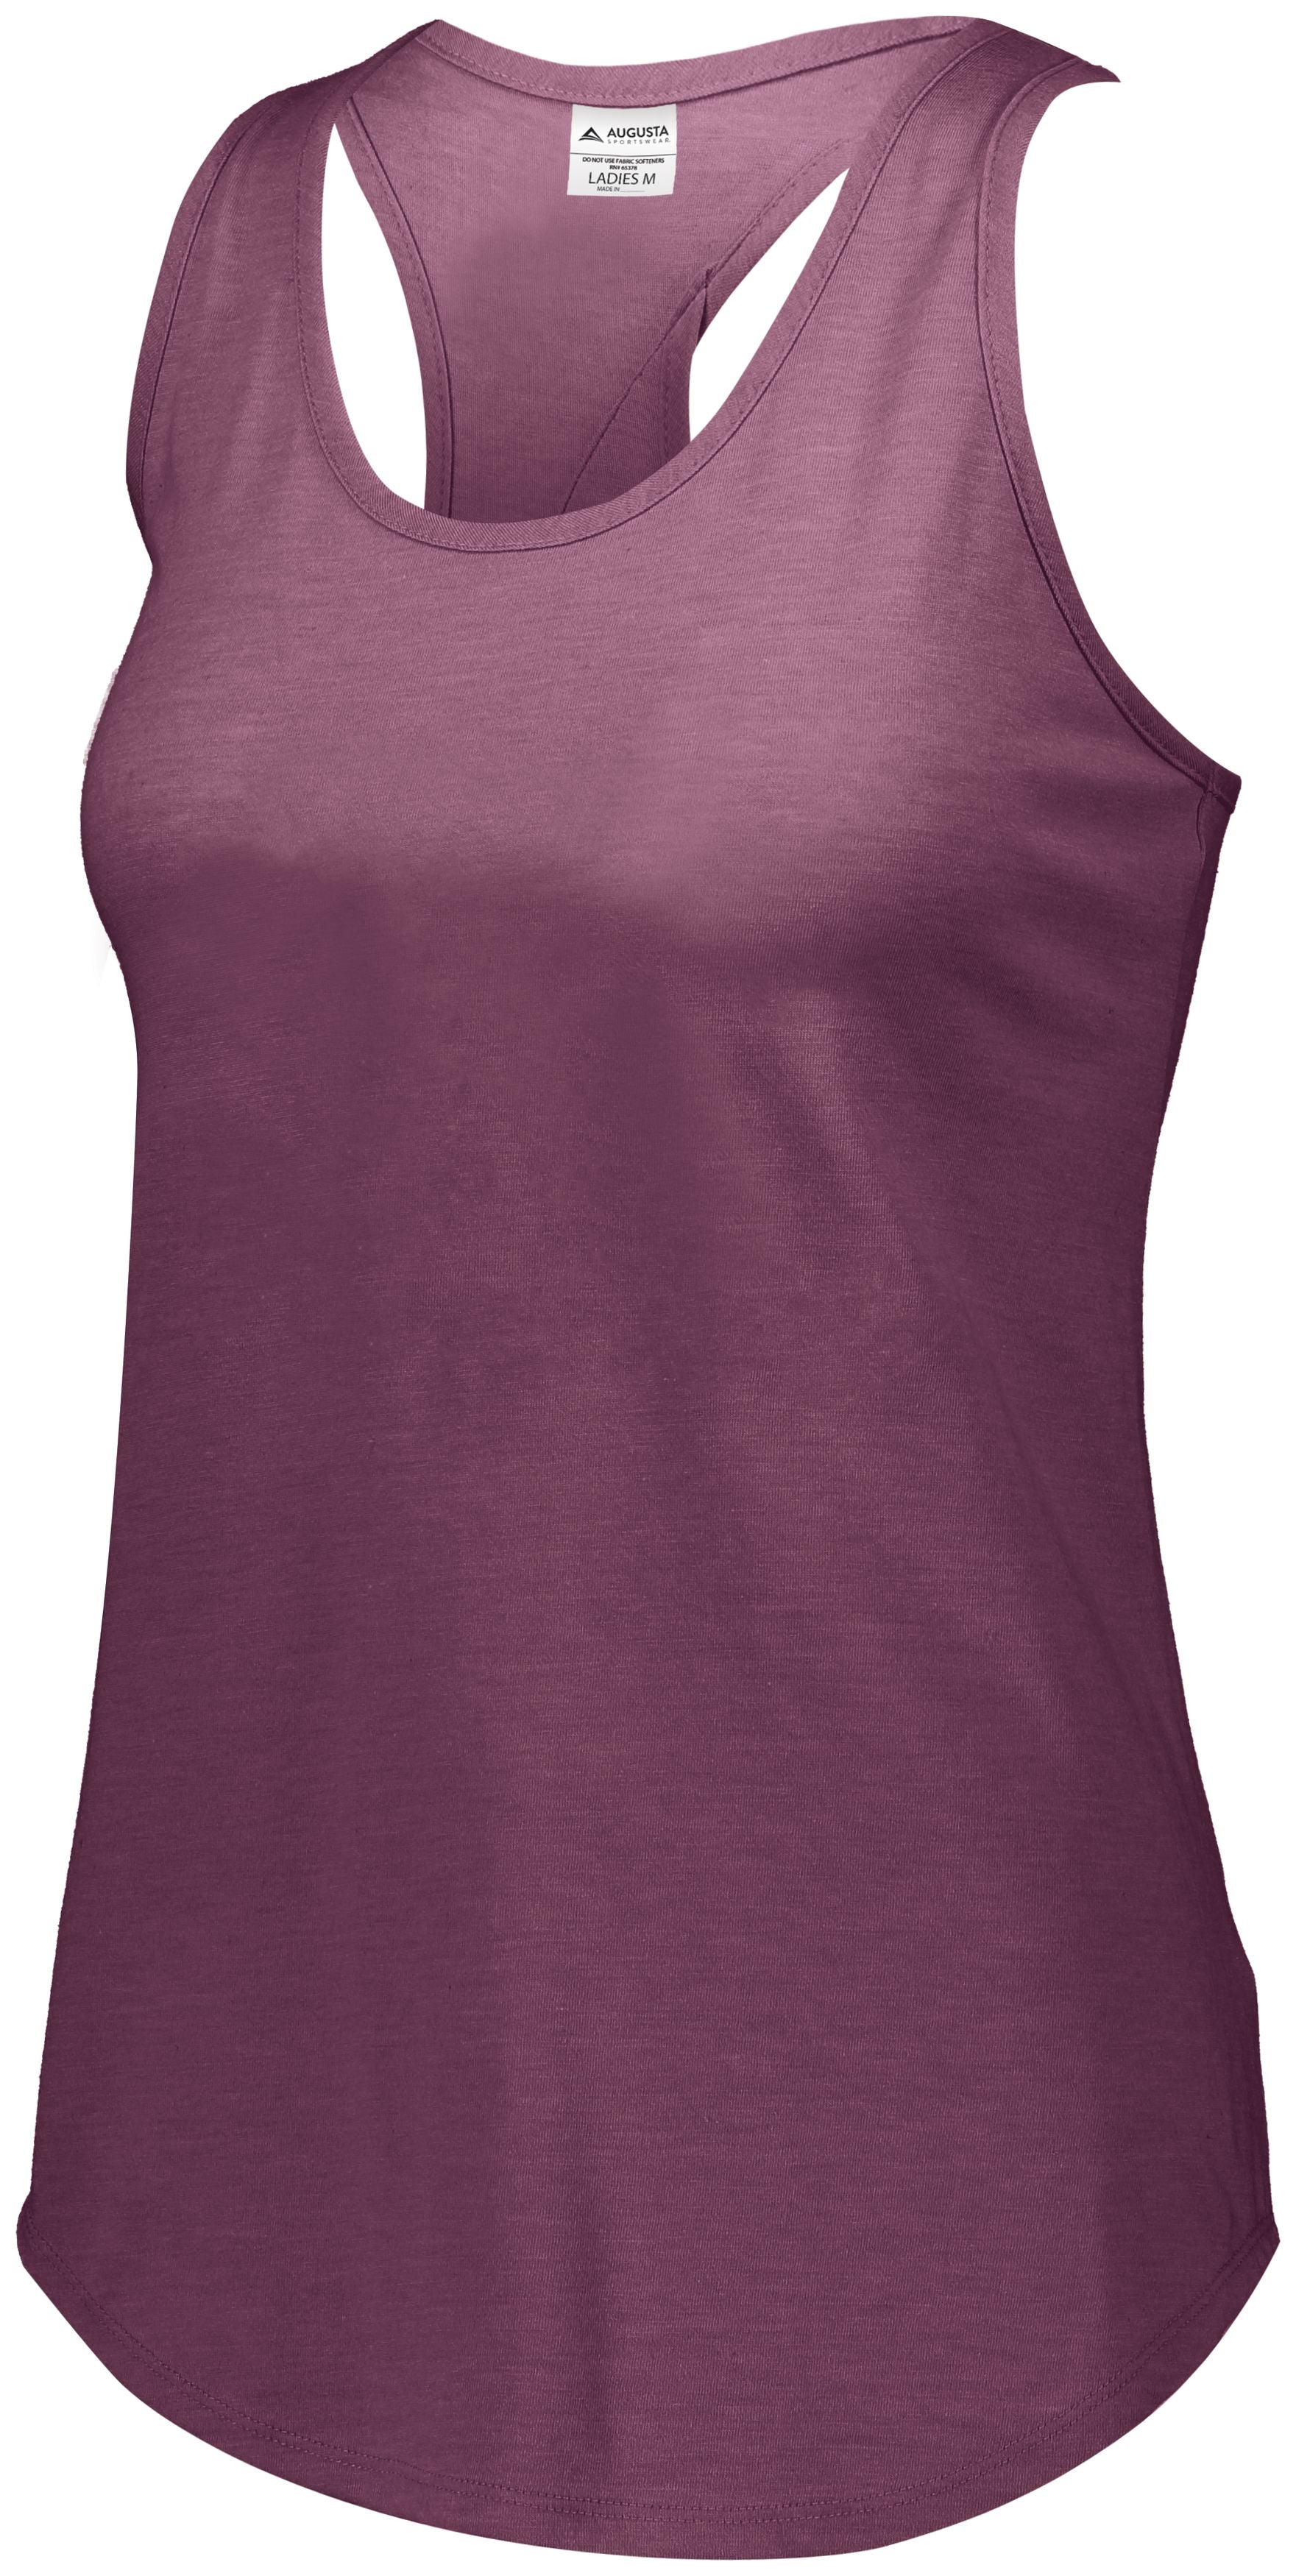 Augusta Sportswear Girls Lux Tri-Blend Tank in Maroon Heather  -Part of the Girls, Augusta-Products, Girls-Tank, Shirts product lines at KanaleyCreations.com